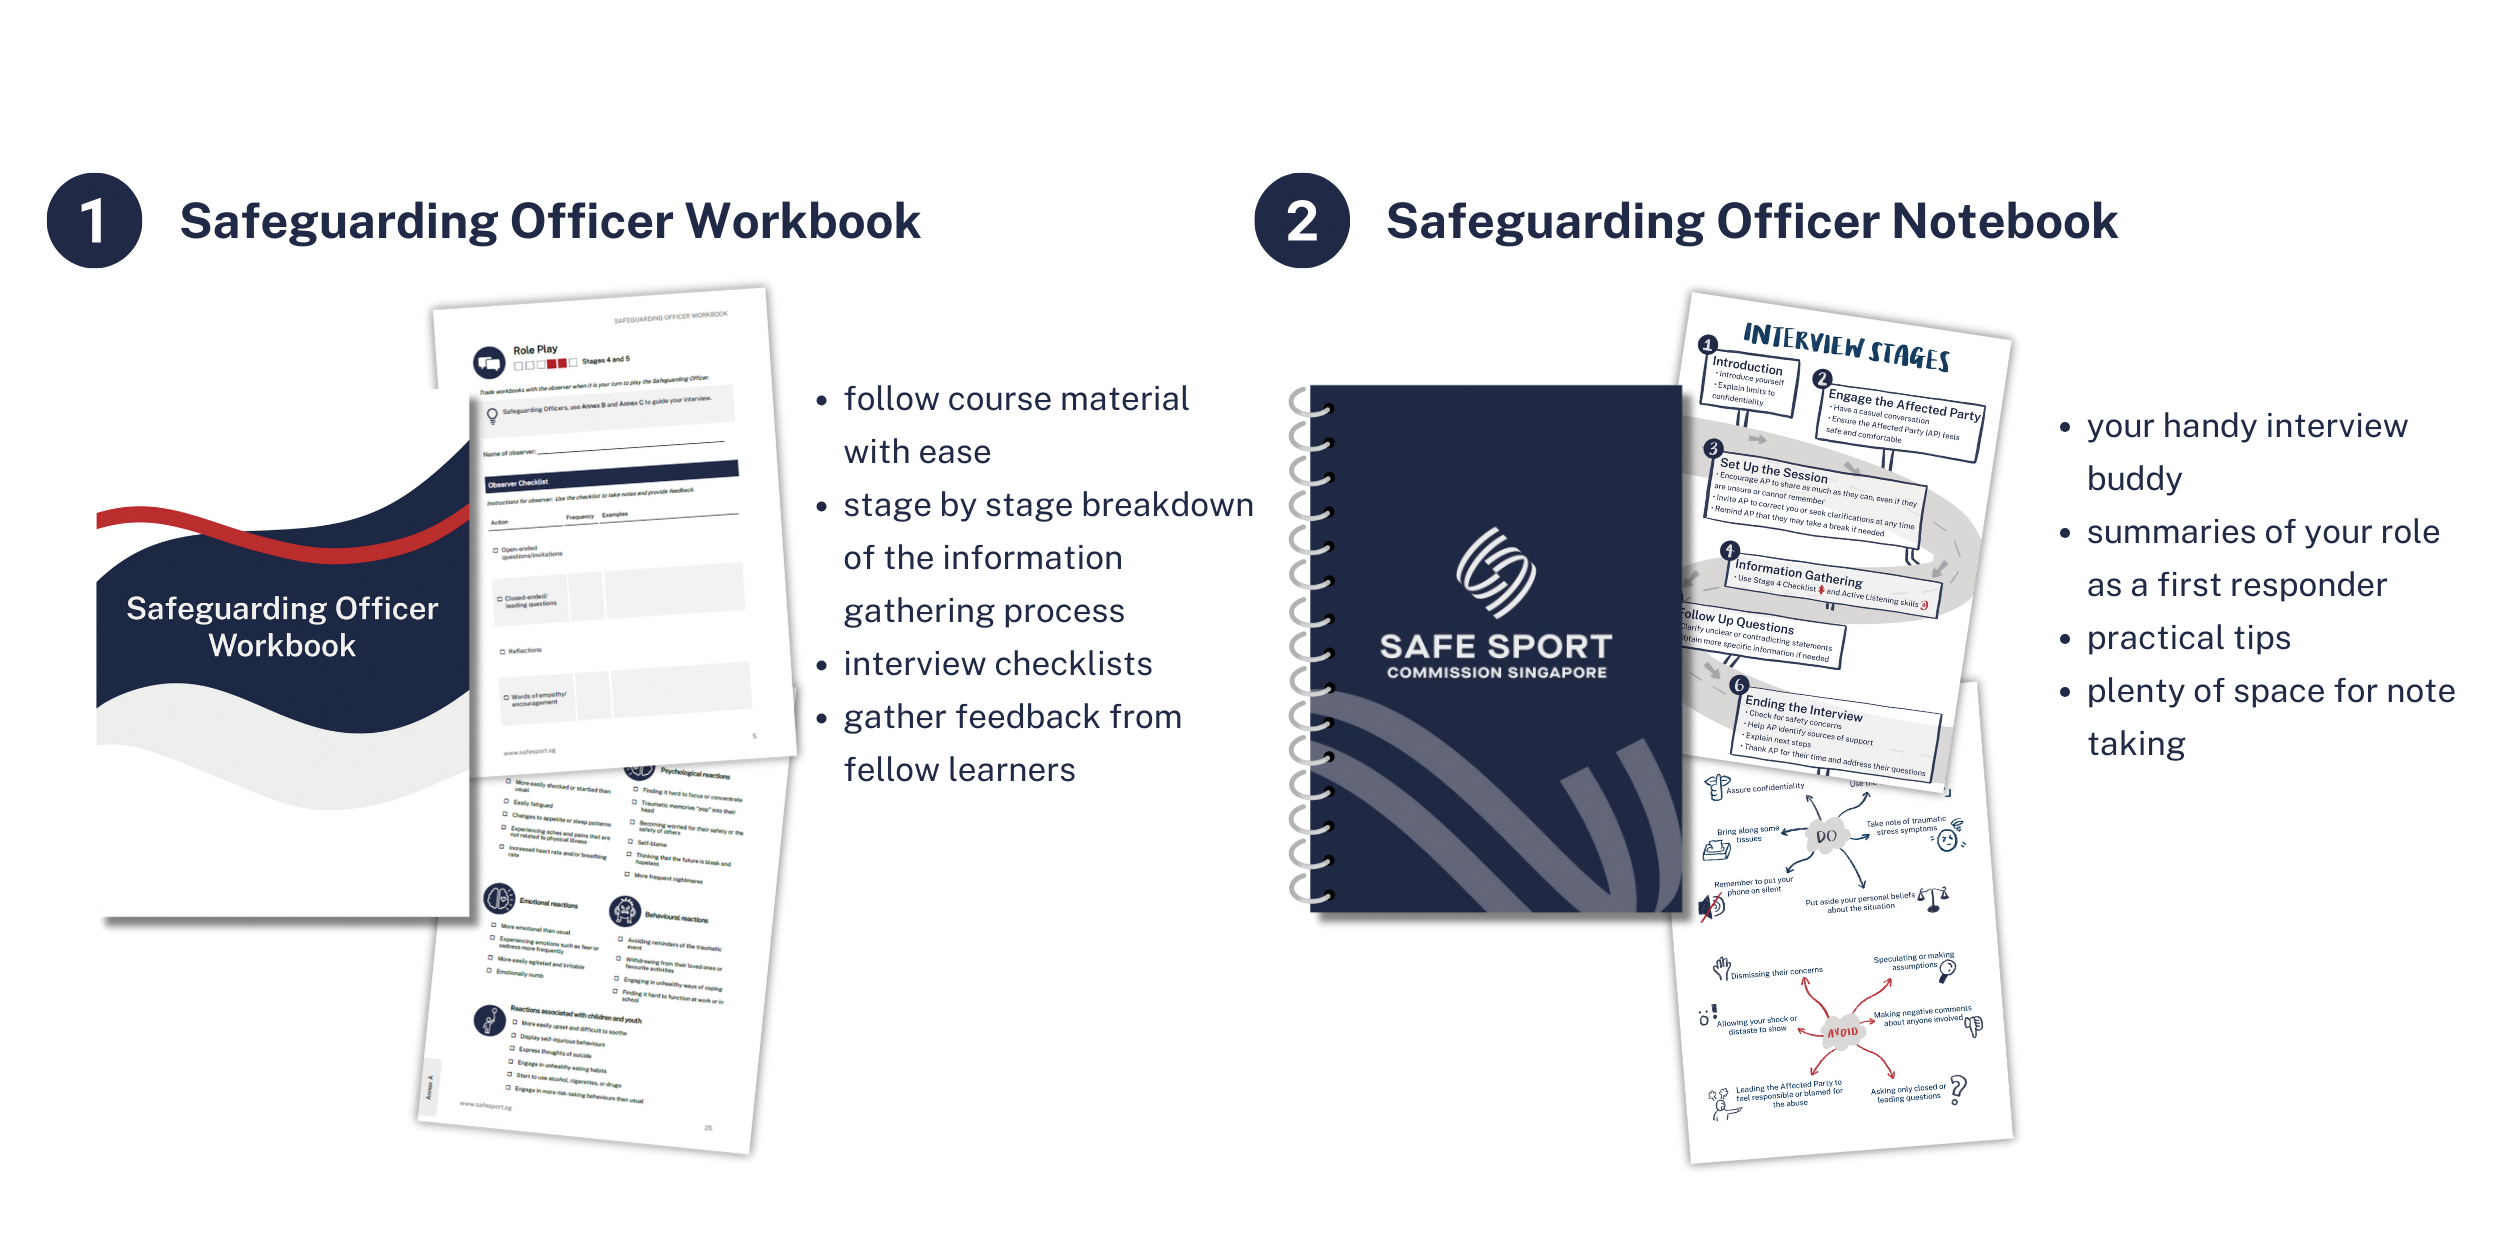 Graphic of training materials provided to Safeguarding Officers